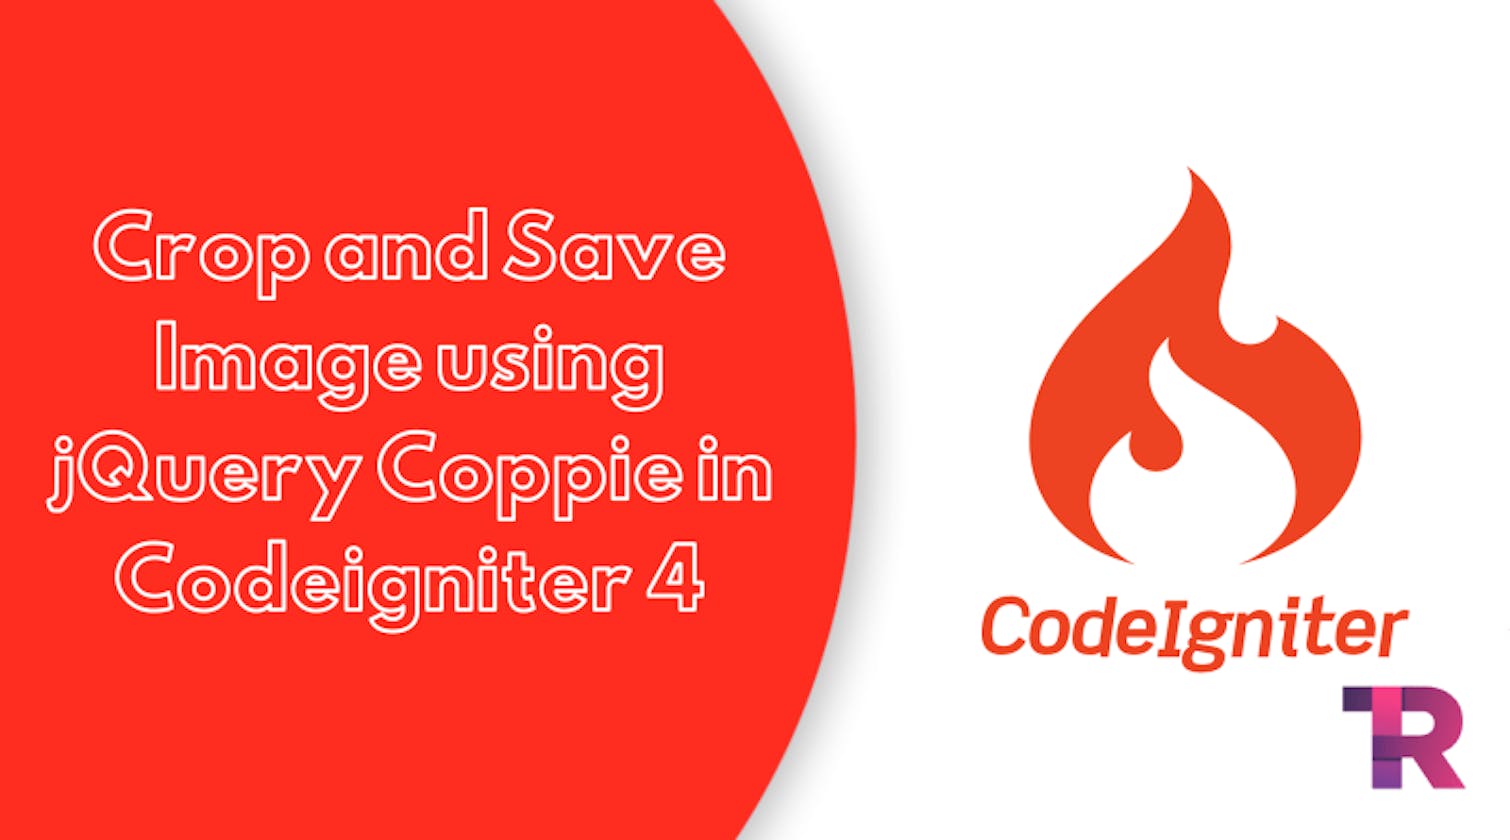 Crop and Save Image using jQuery Coppie in Codeigniter 4